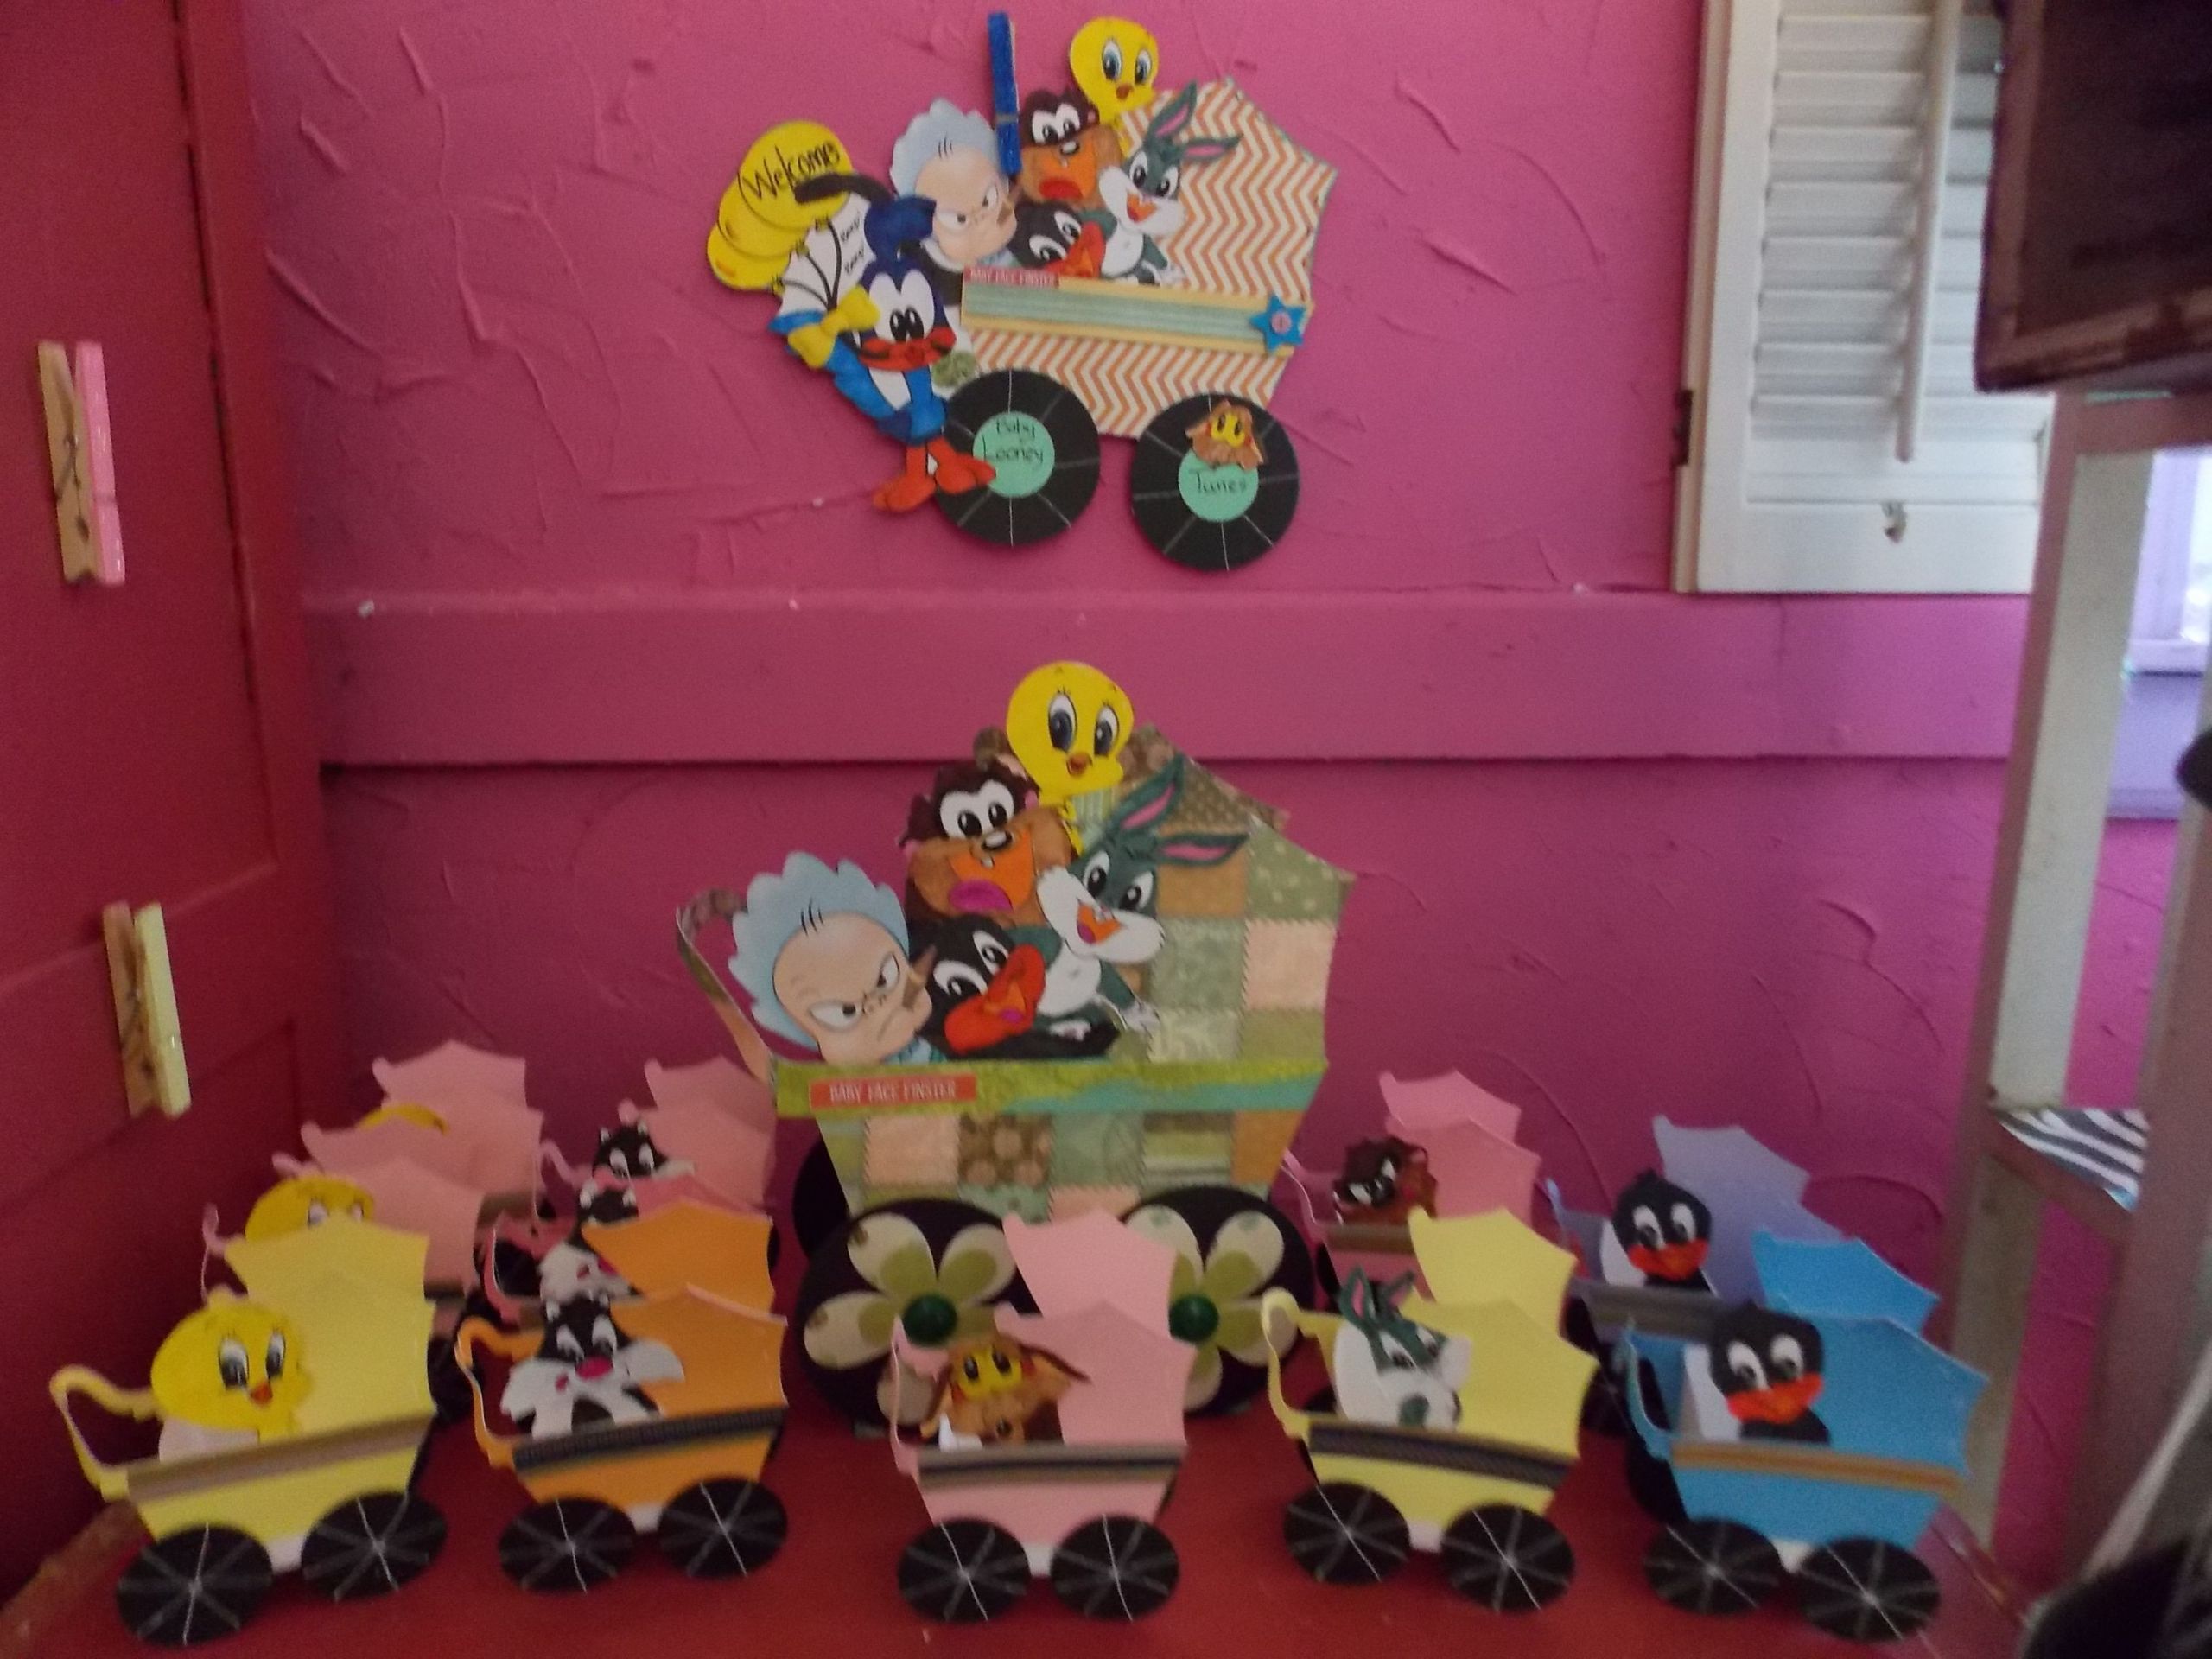 Baby Looney Tunes Party Decorations
 for the perfect baby looney tune party